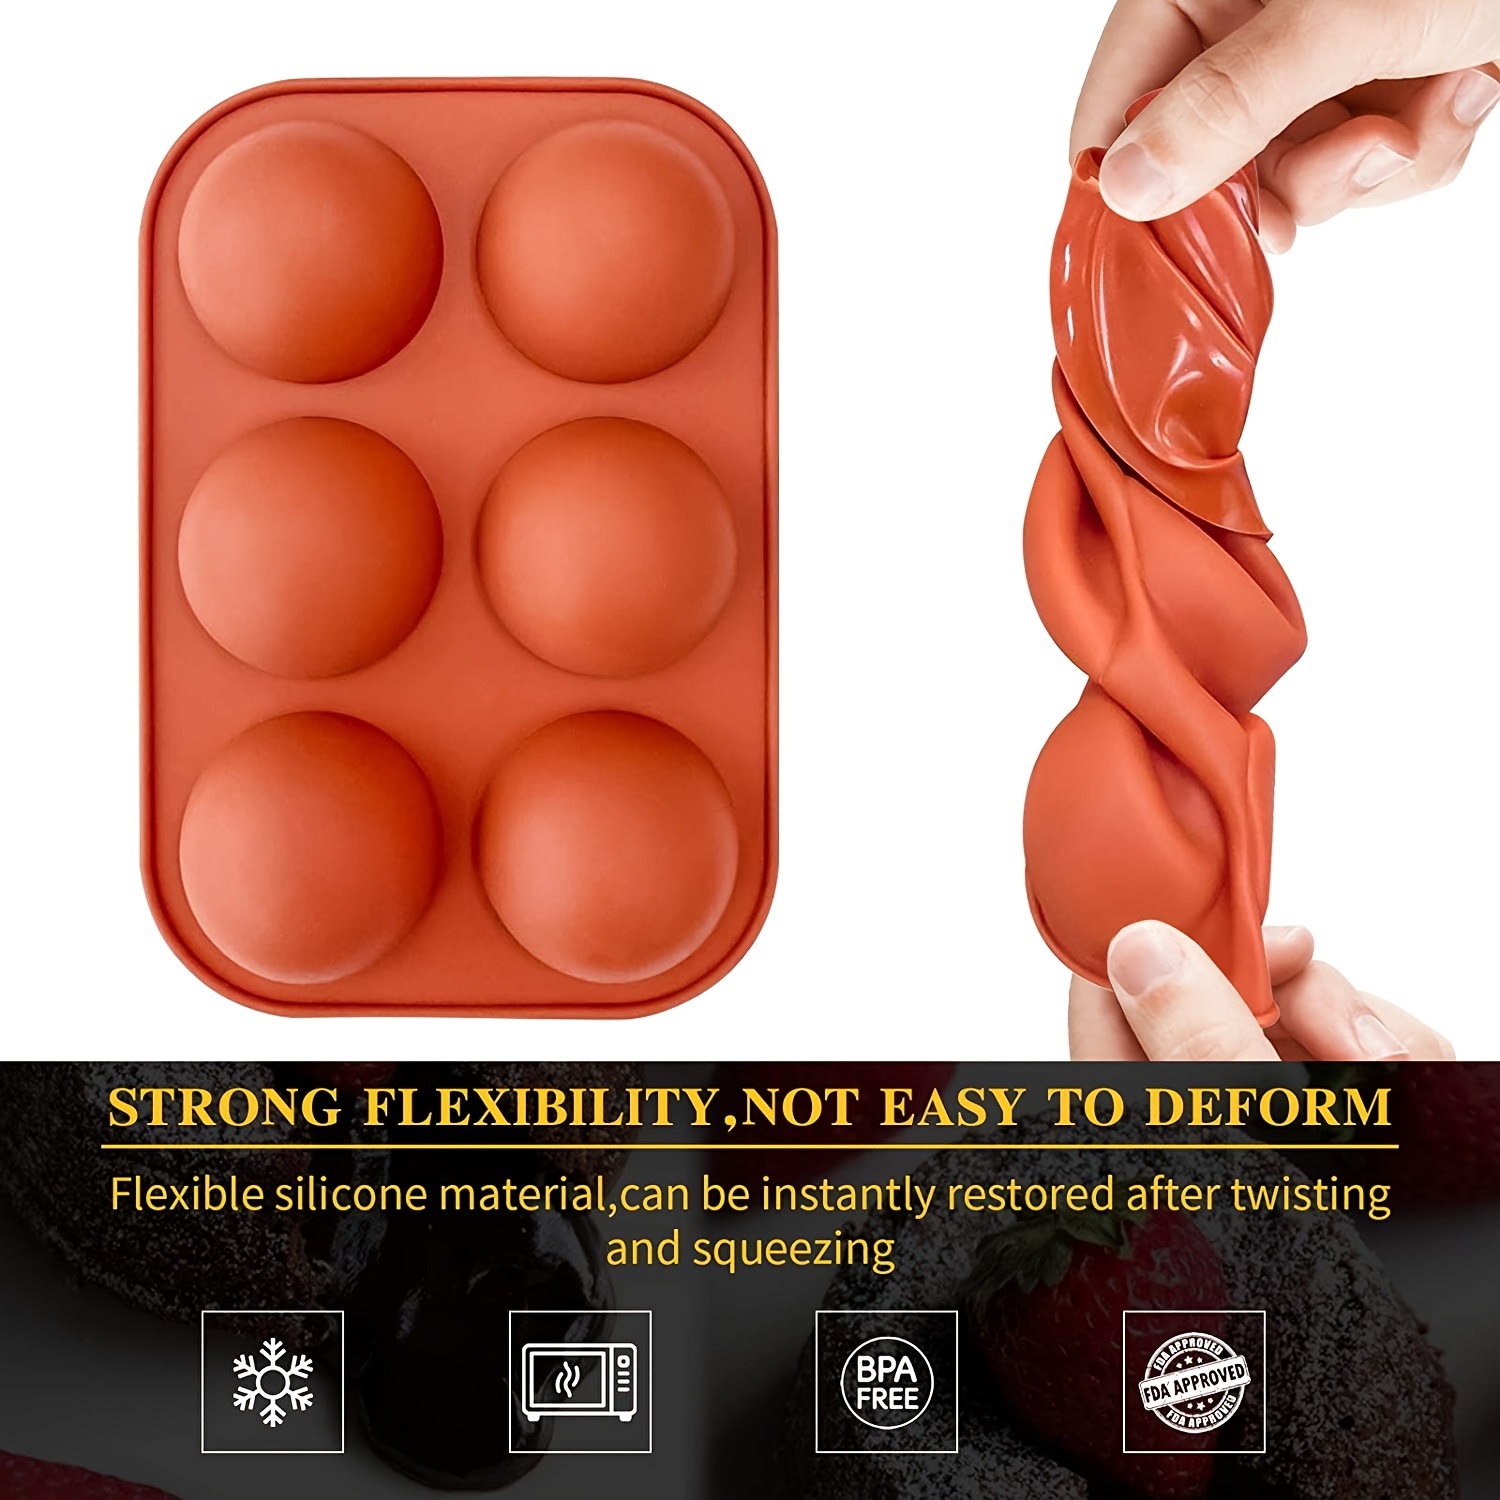 RESOME 15 - Love Heart Molds Silicone, Heart Shaped Chocolate Mold Heart  Mold for Making Chocolate Cake Mousse Dessert Jelly Pudding Ice Cream 3D